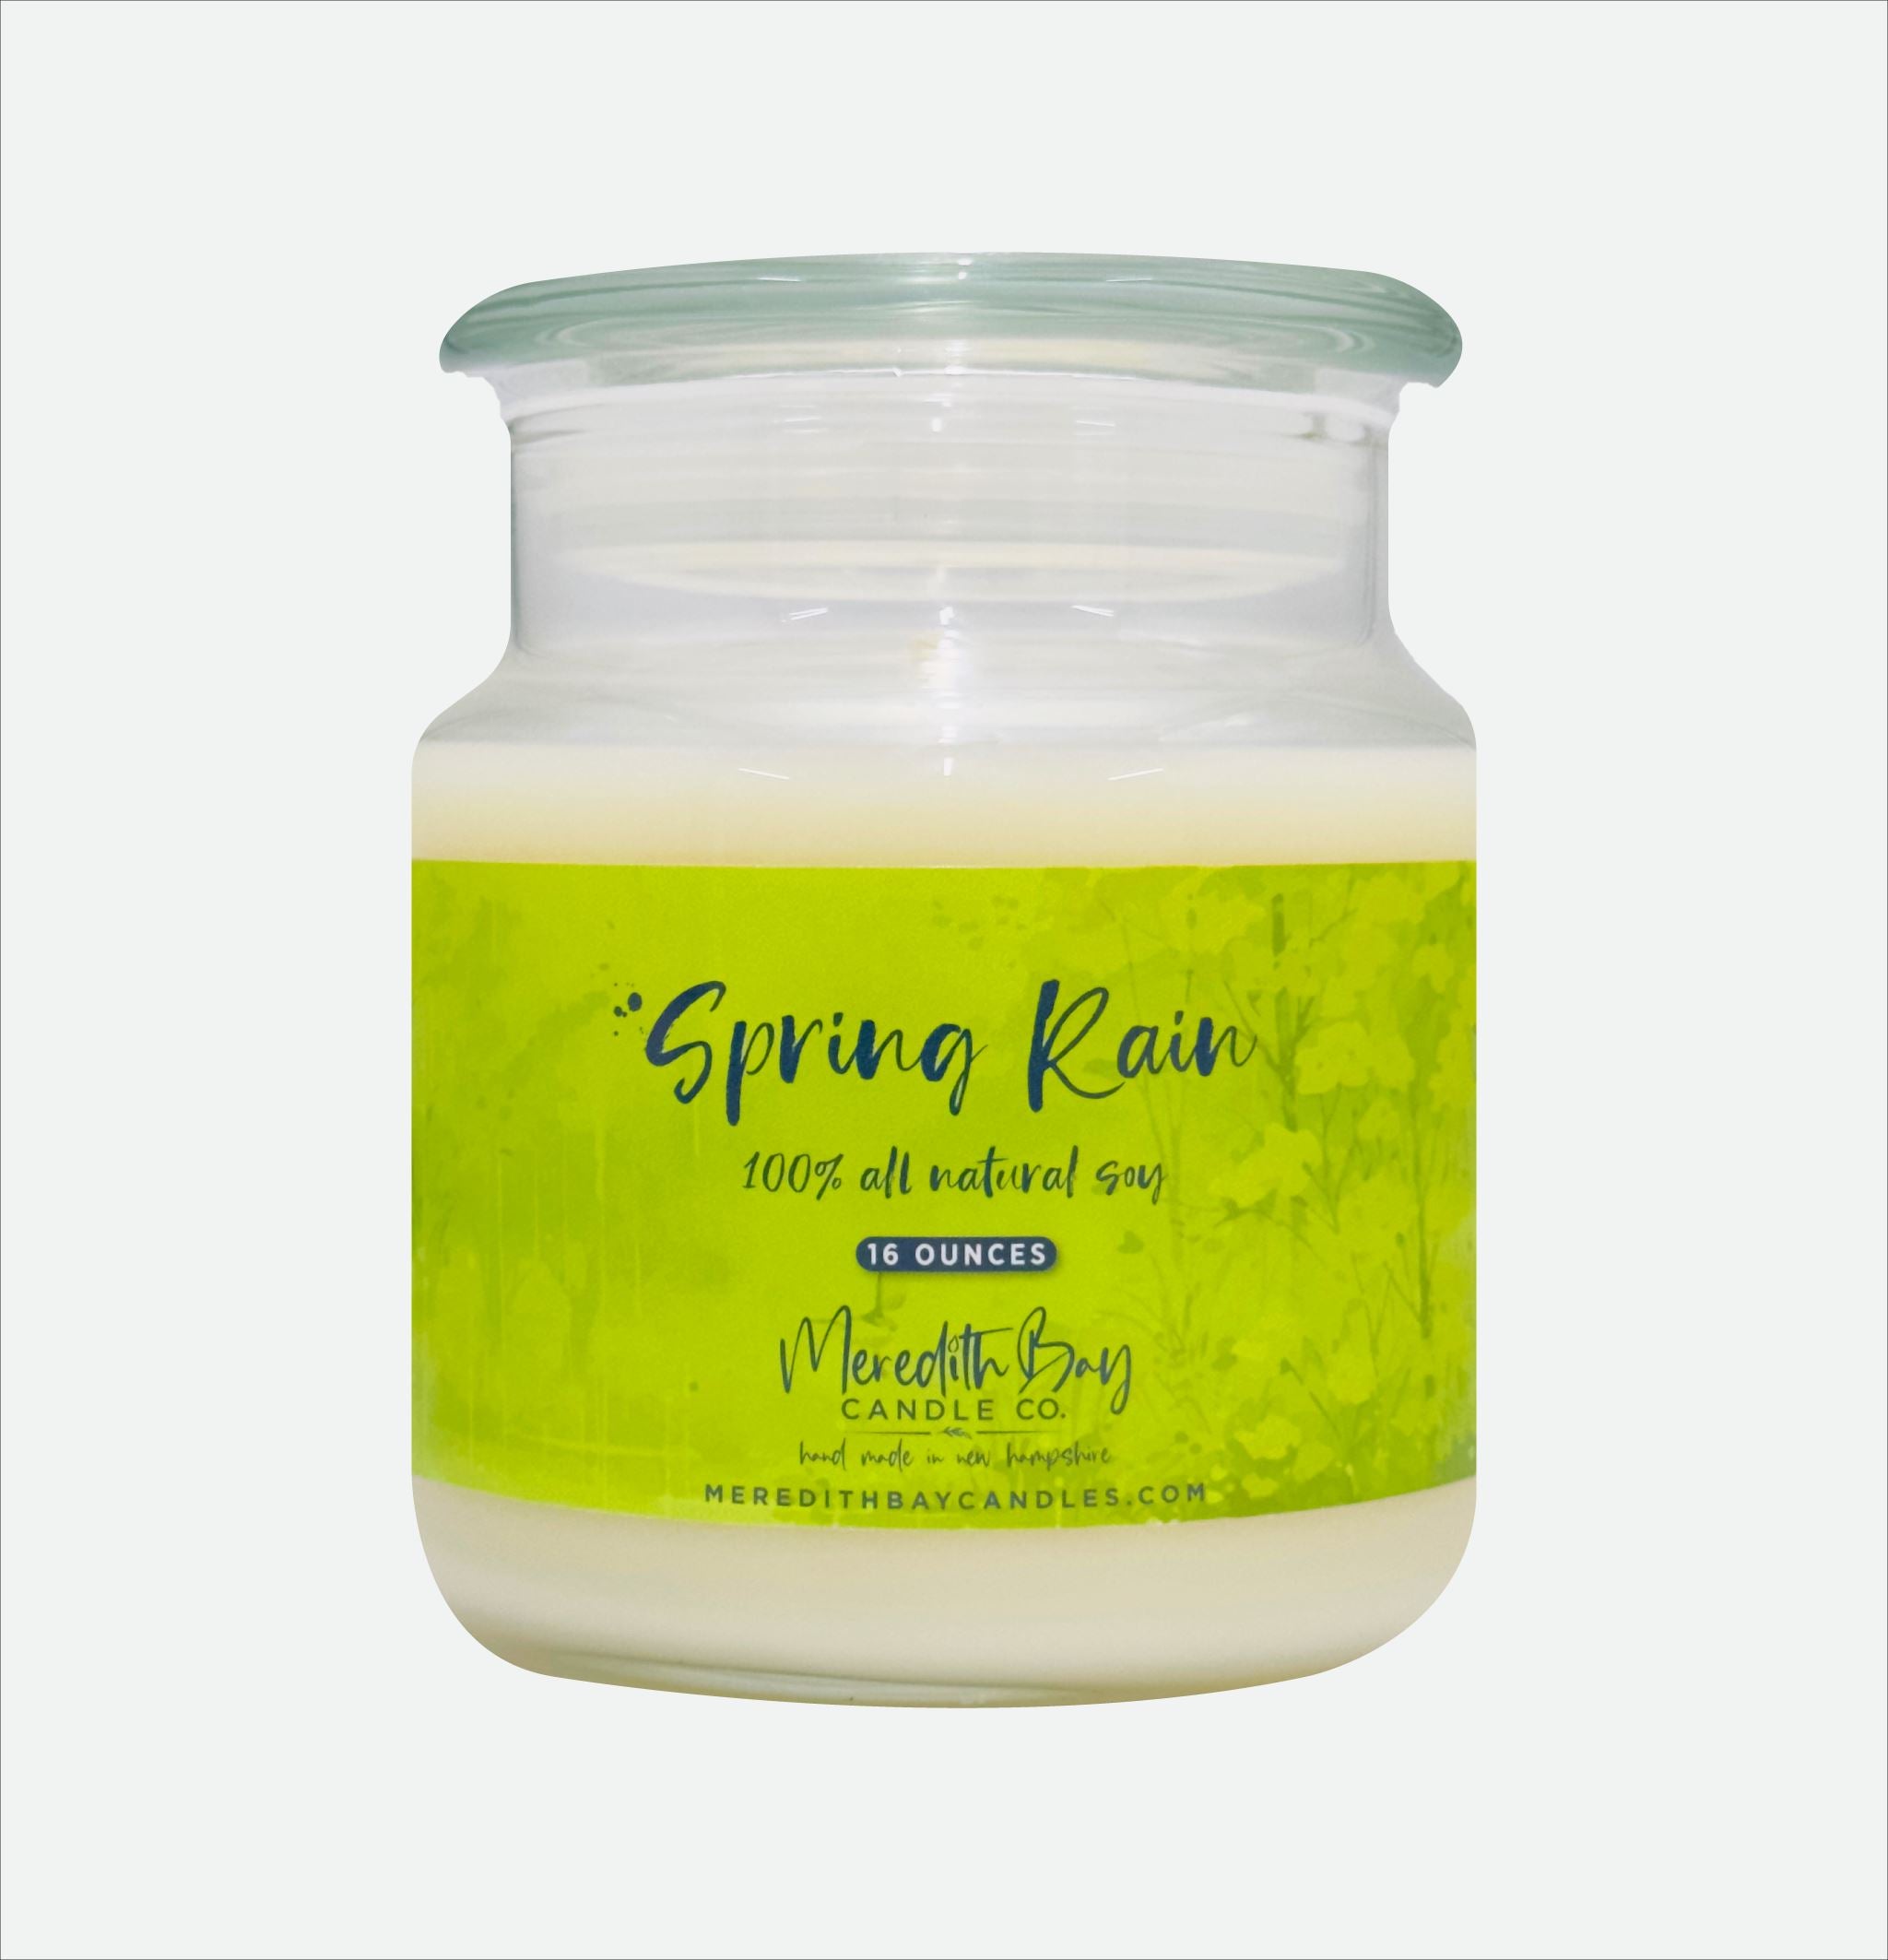 Spring Rain Soy Candle Meredith Bay Candle Co 16 Oz 